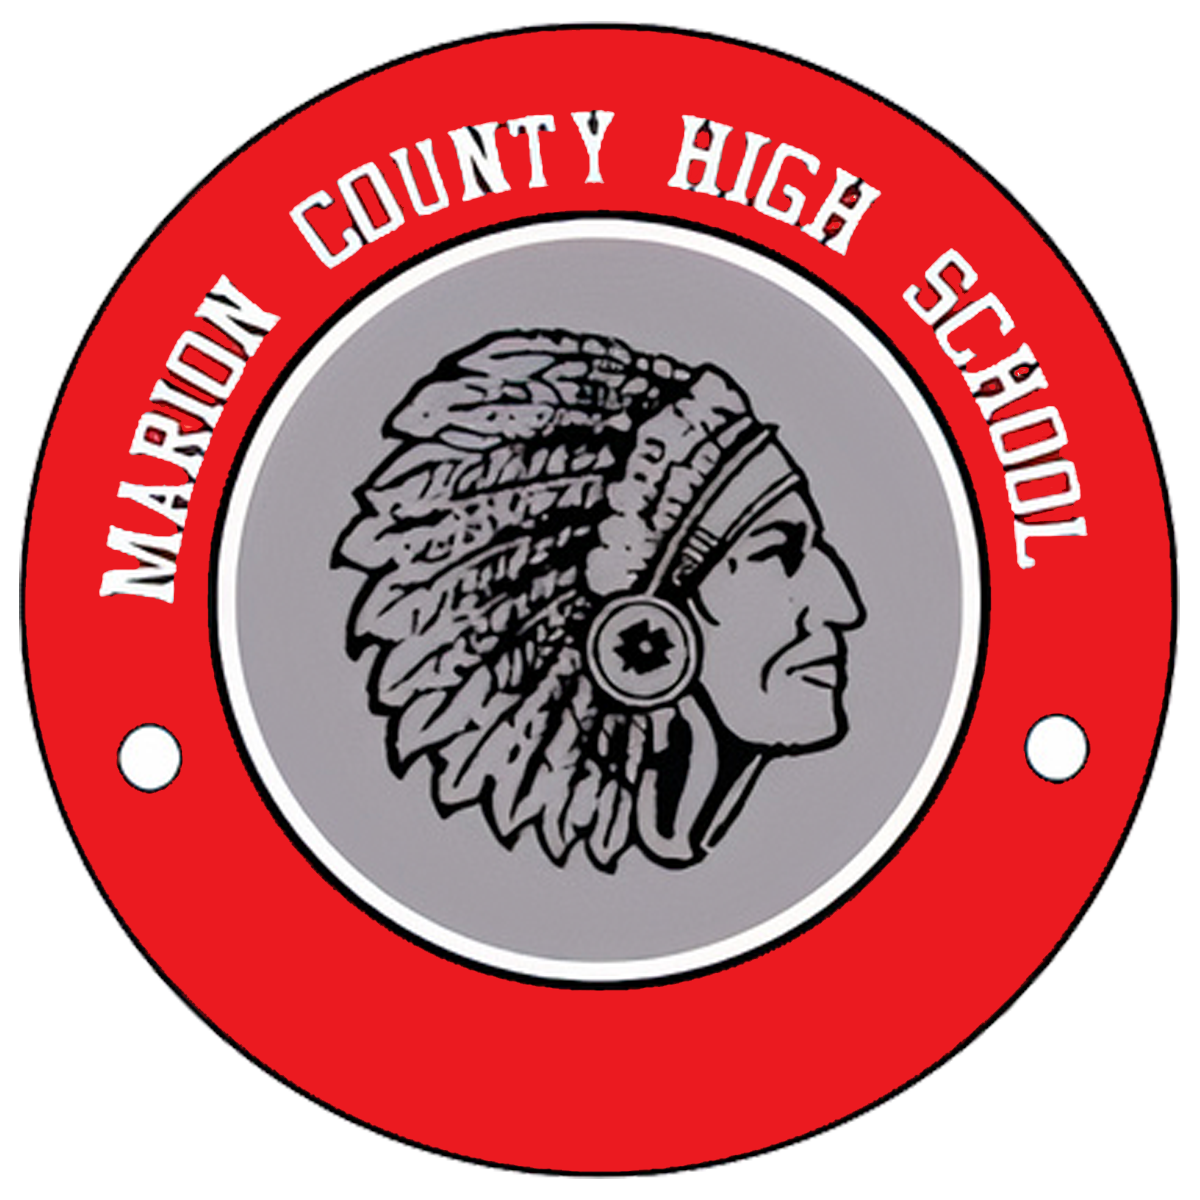 track-and-field-marion-county-high-school